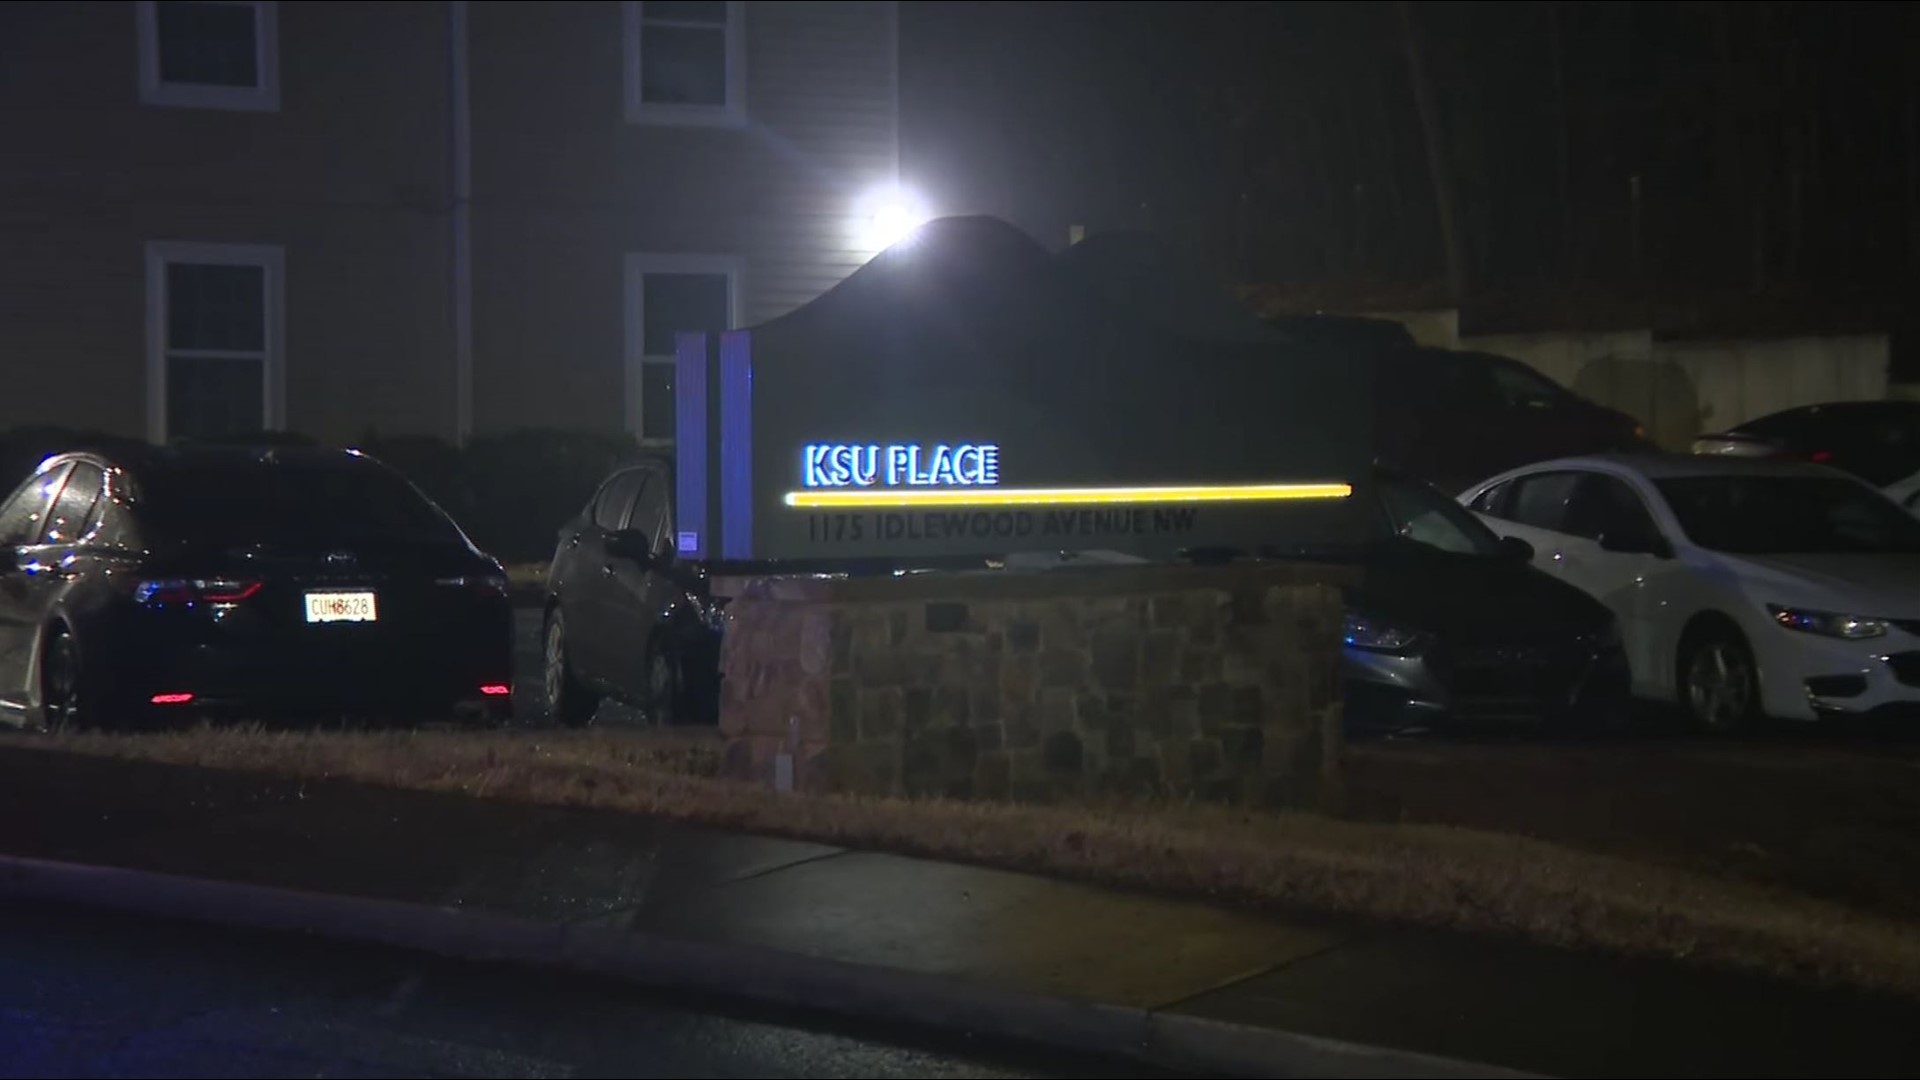 One person is in custody after a carjacking near Kennesaw State University led to a campus-wide alert on Wednesday evening, according to Cobb County Police.